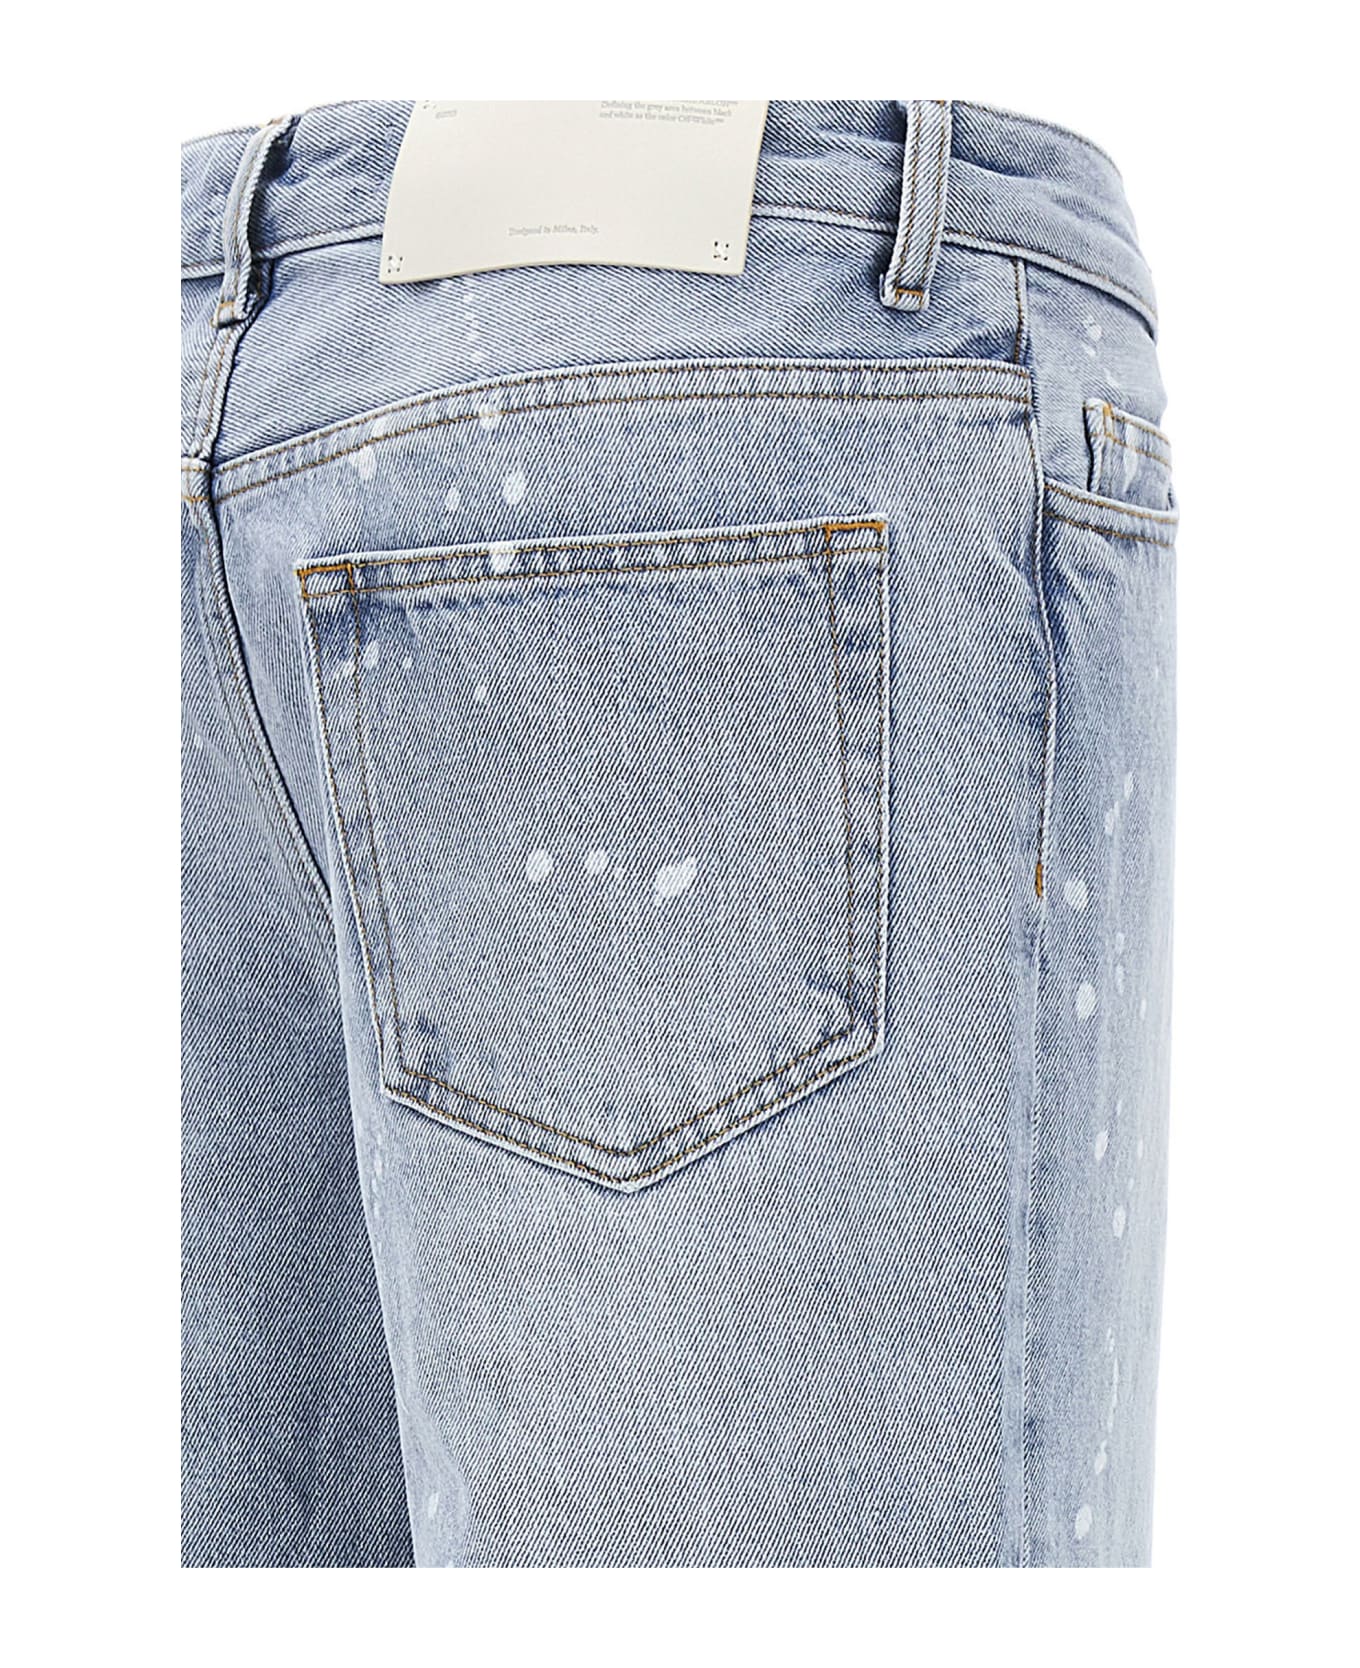 Off-White 'toybox' Jeans - Light Blue